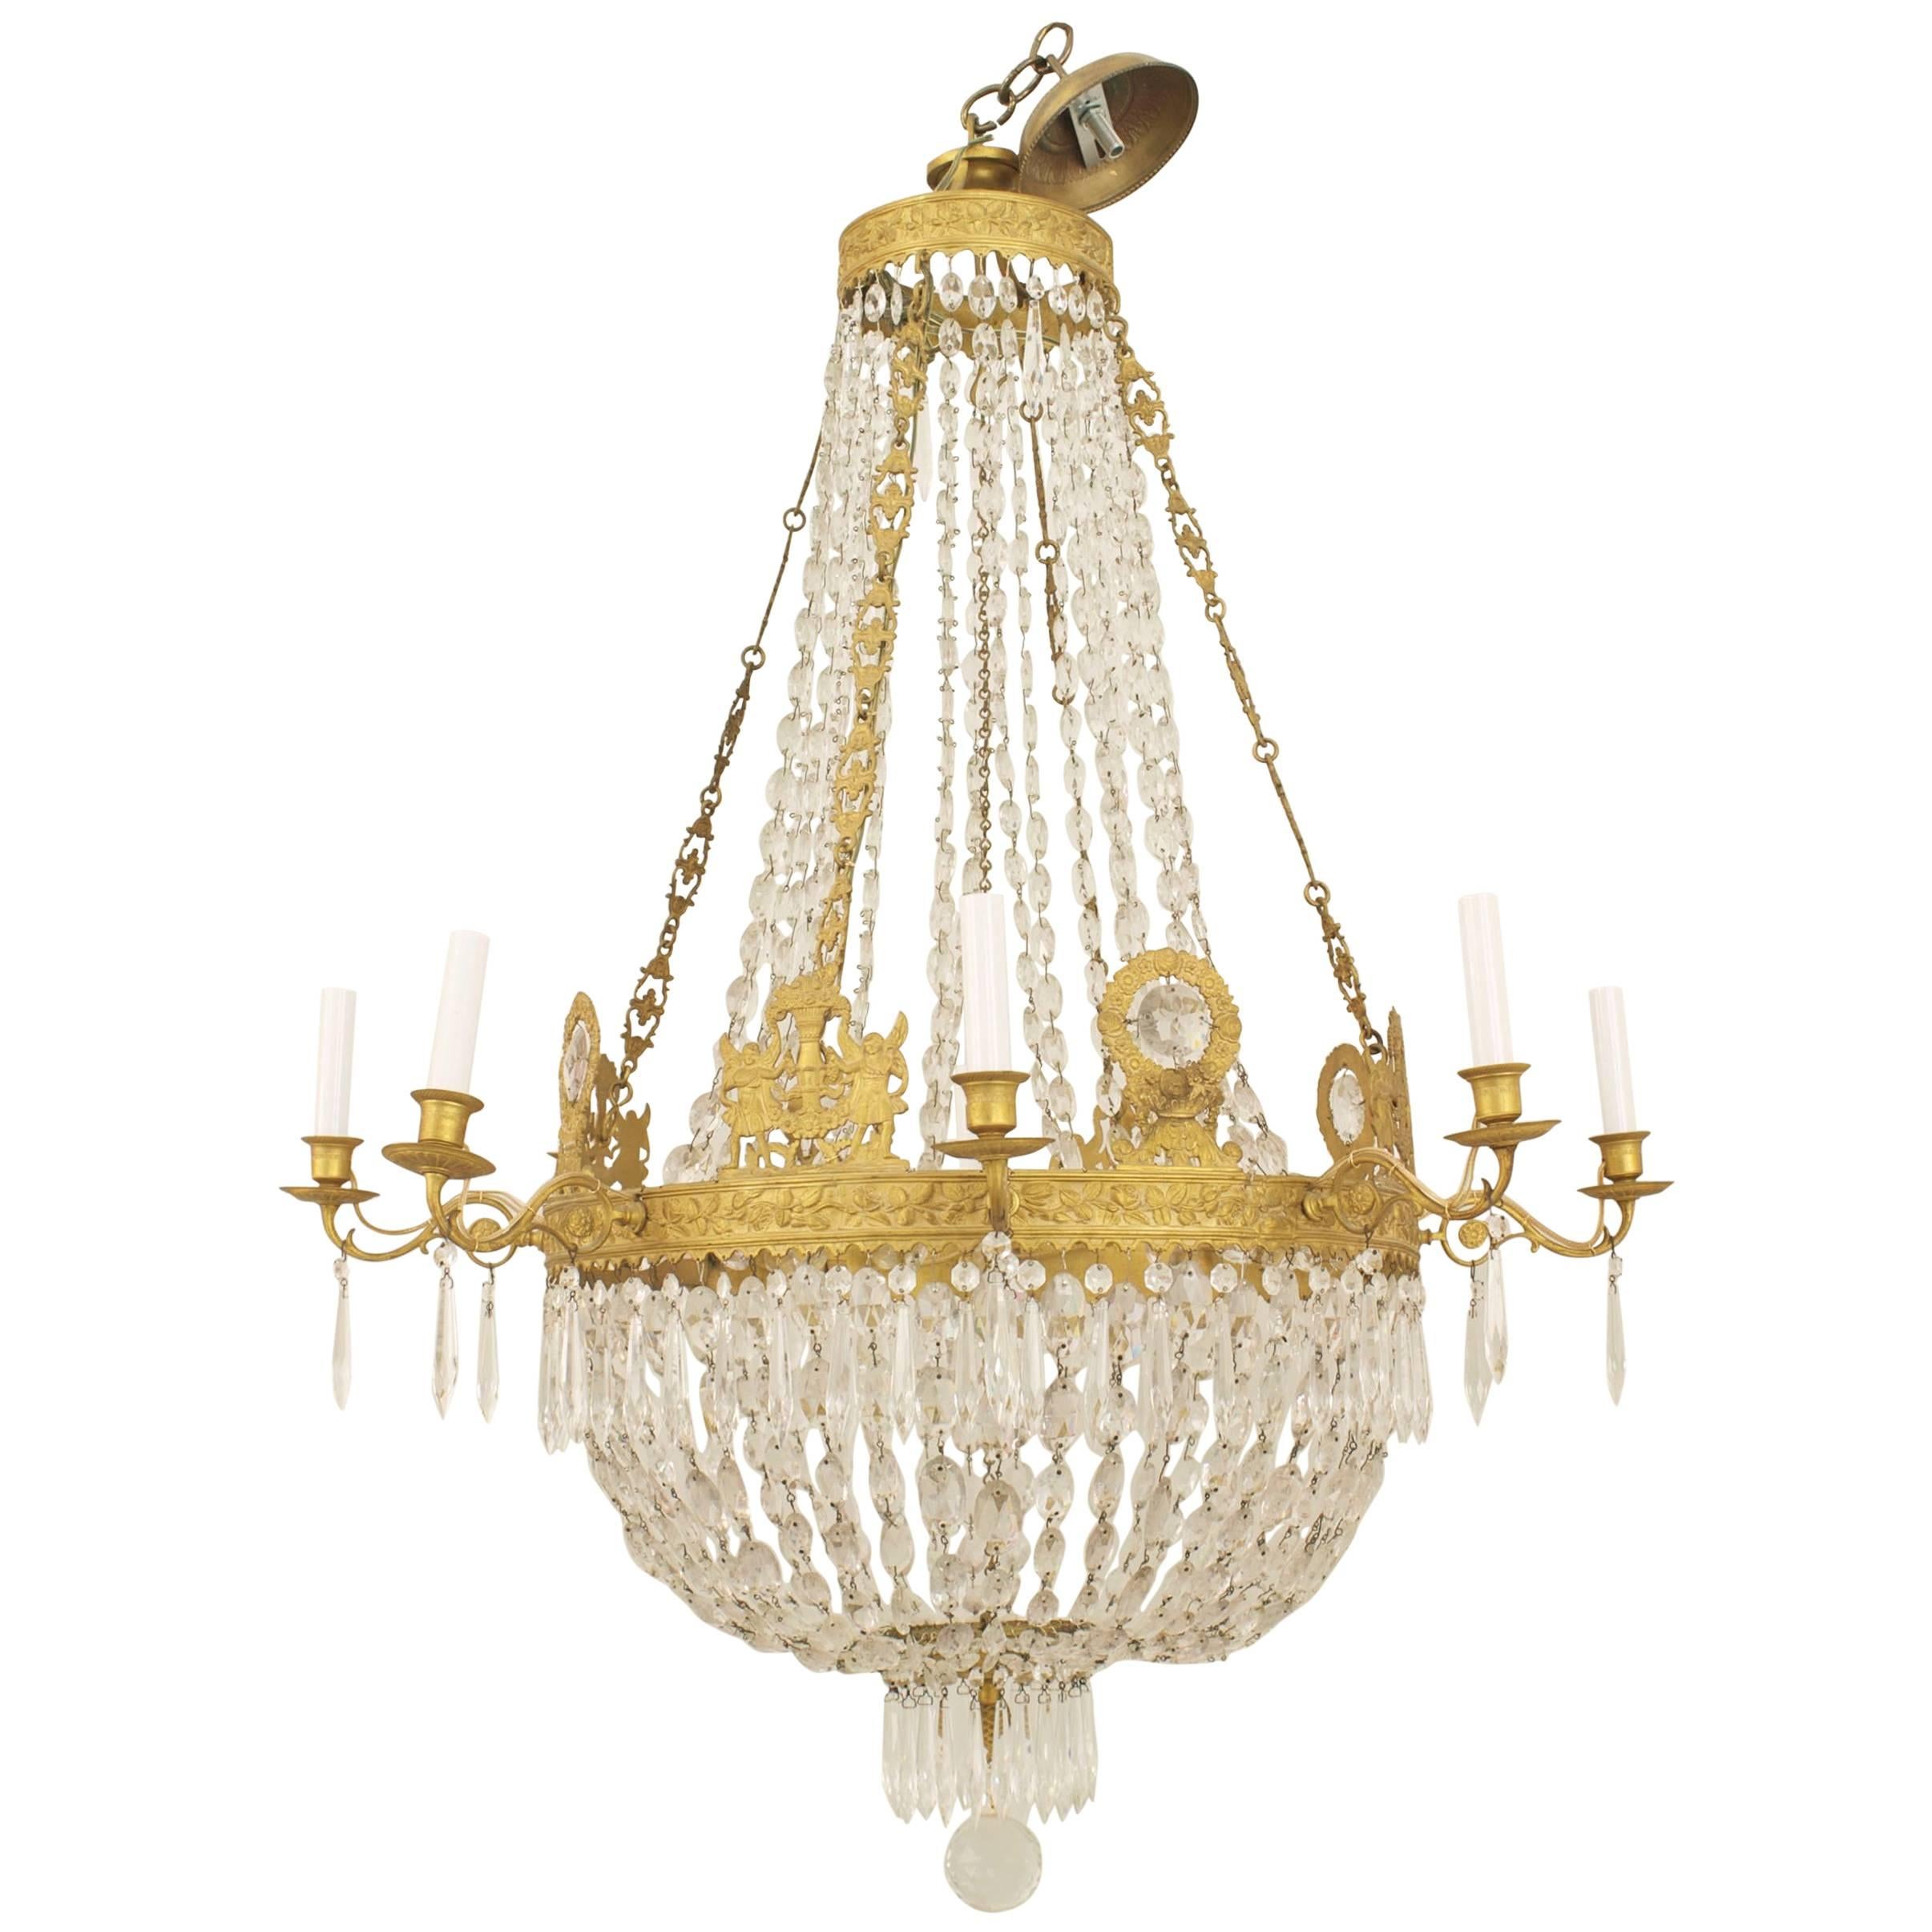 French Empire Gilt Bronze and Crystal Chandelier